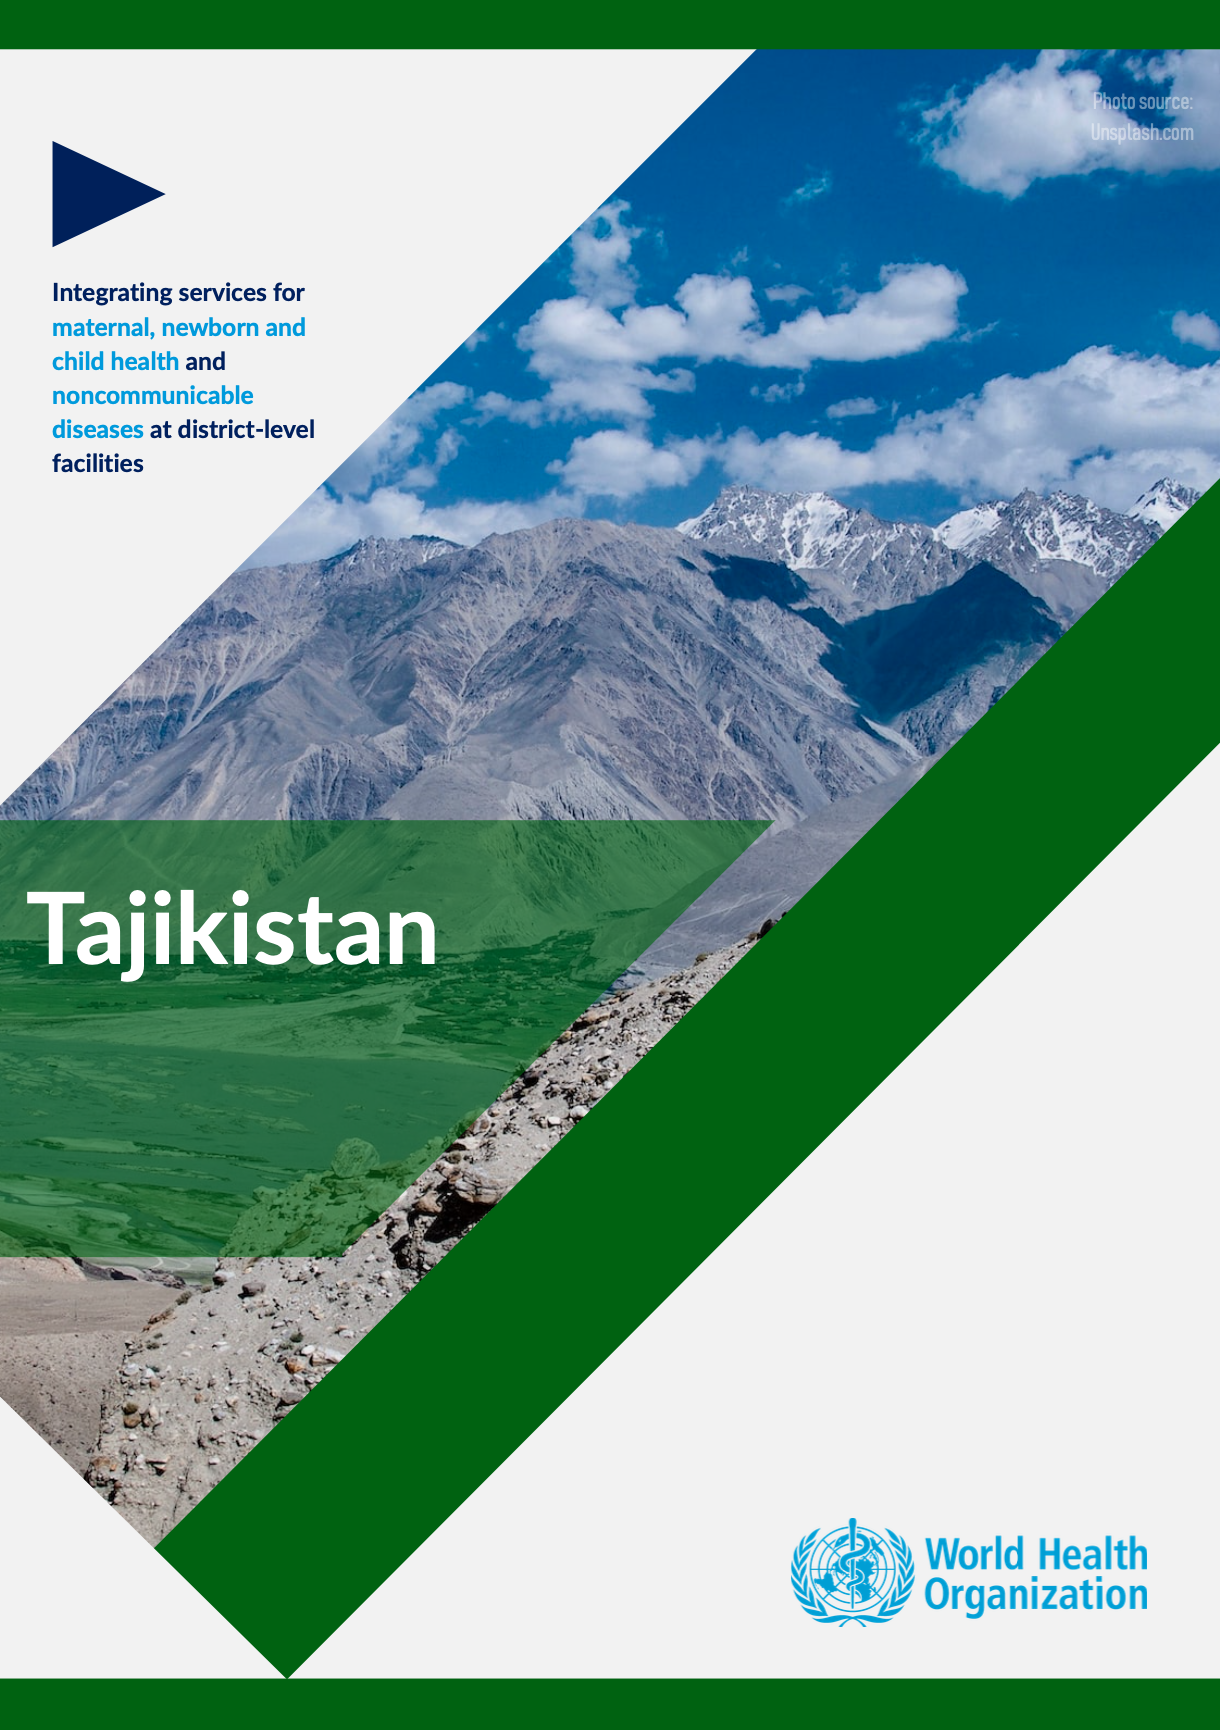 Integrating services for maternal, newborn and child health and noncommunicable diseases at district-level facilities: Tajikistan